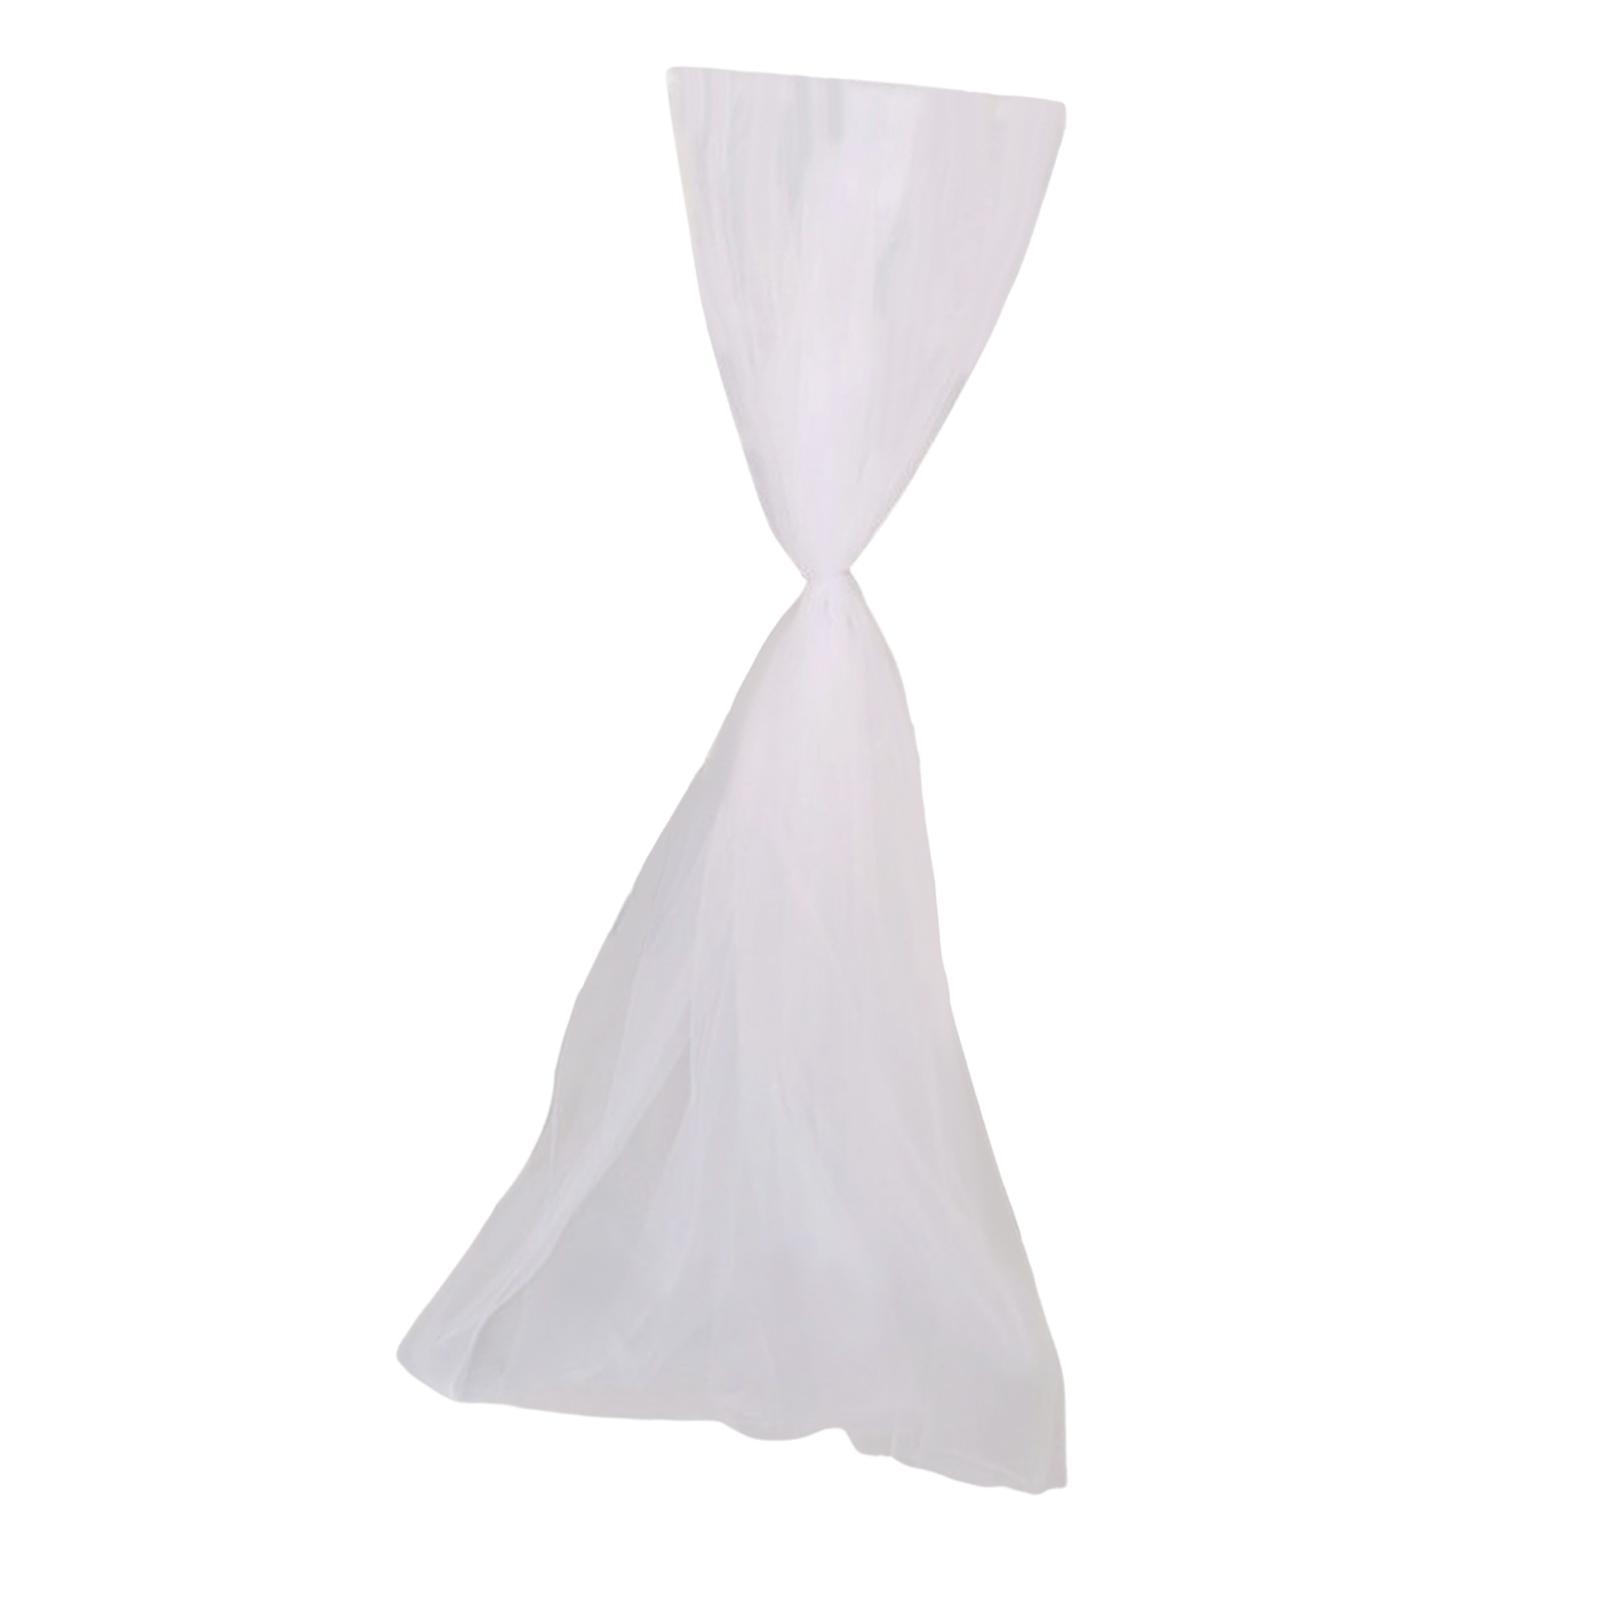 Wedding Tulle Roll Curtain Chair Sashes DIY for Party Centerpiece Chair